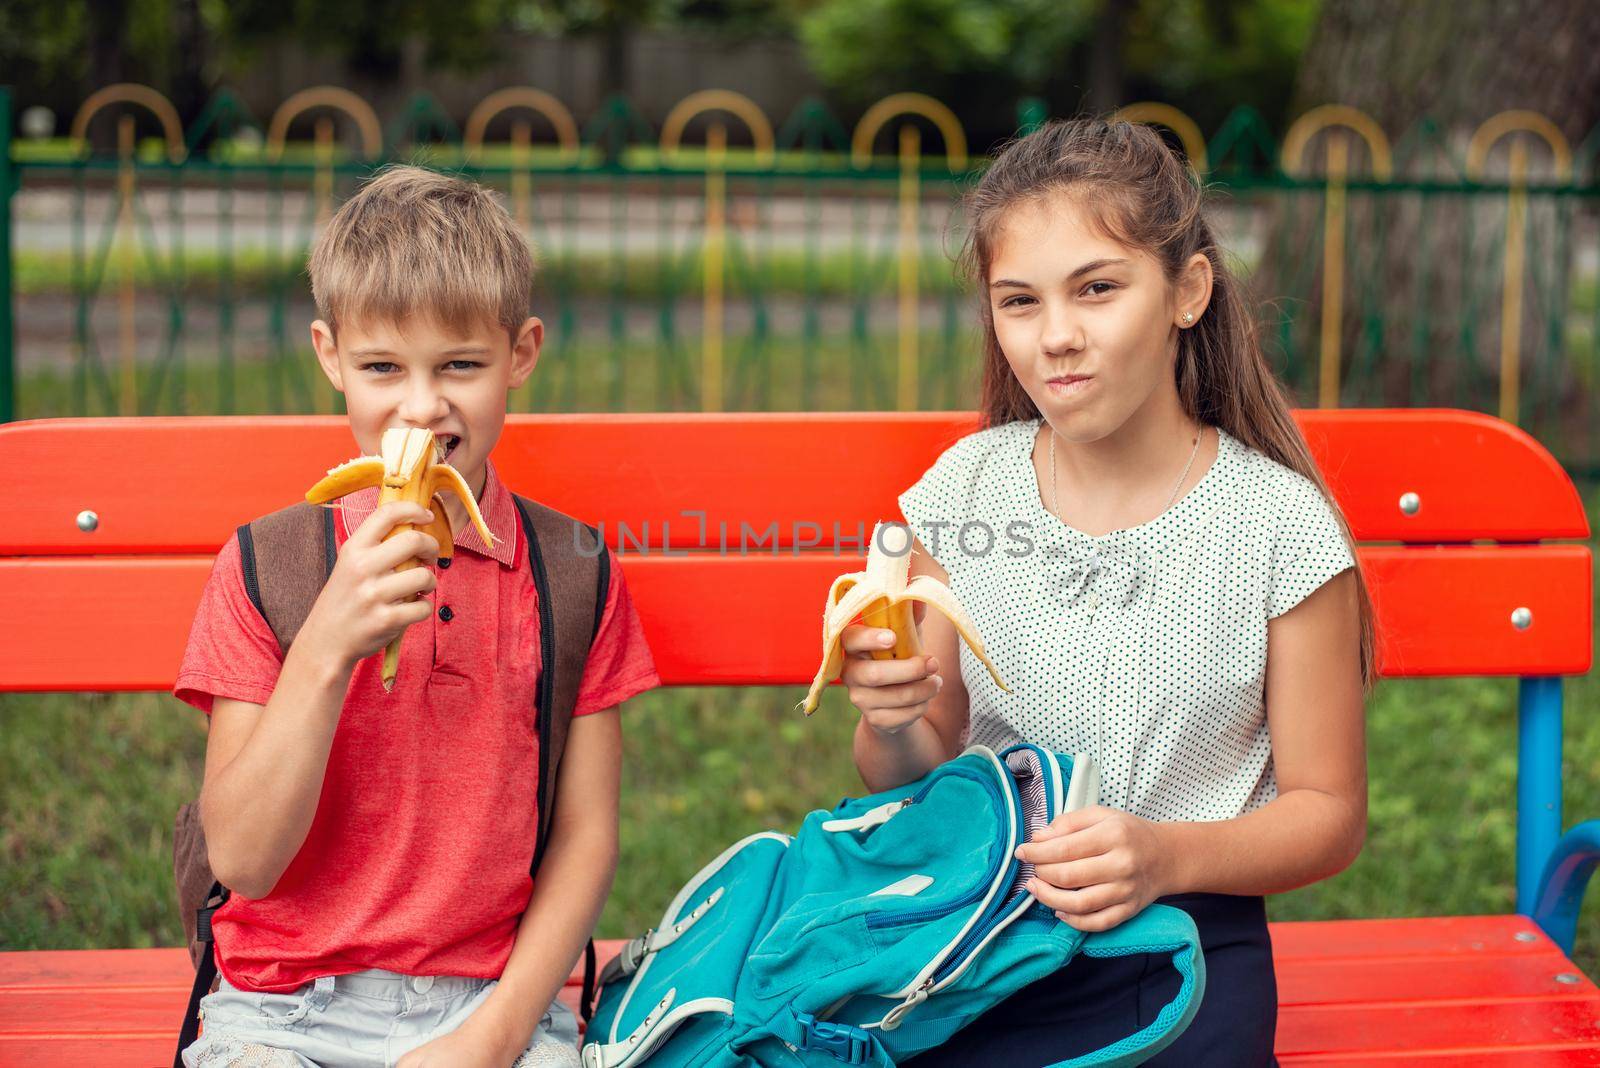 Two pupils friends, girl and boy, sitting on the bench near the school and eating bananas